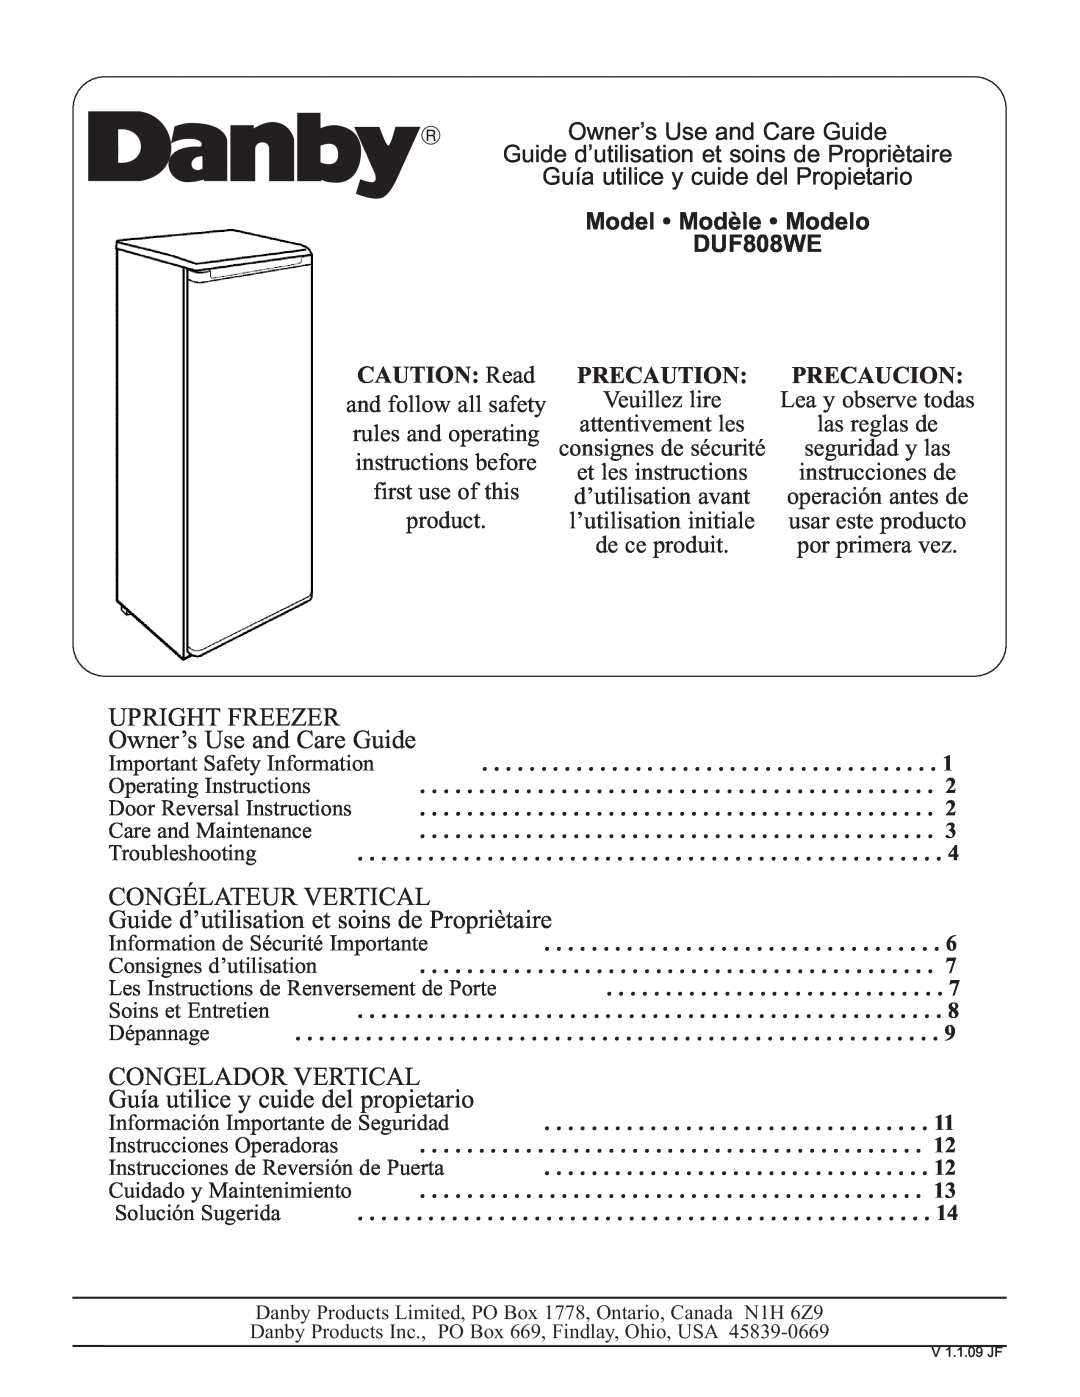 Danby DUF808WE operating instructions Upright Freezer, Owner’s Use and Care Guide, Congélateur Vertical, CAUTION Read 